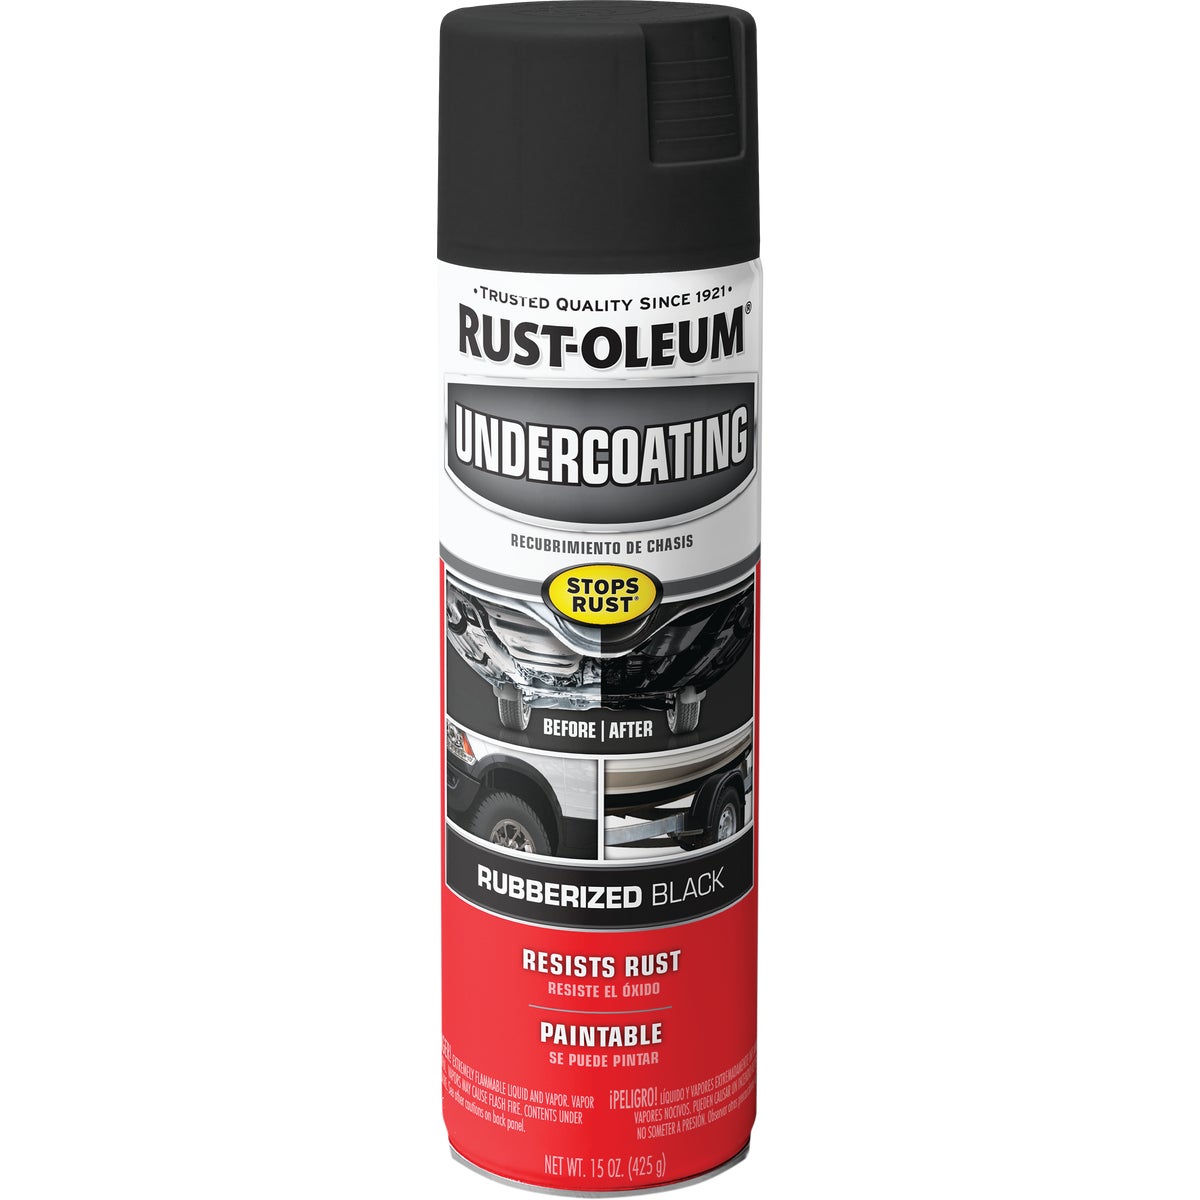 Item 771283, Protect the most valuable parts of your vehicle with Rust-Oleum Rubberized 